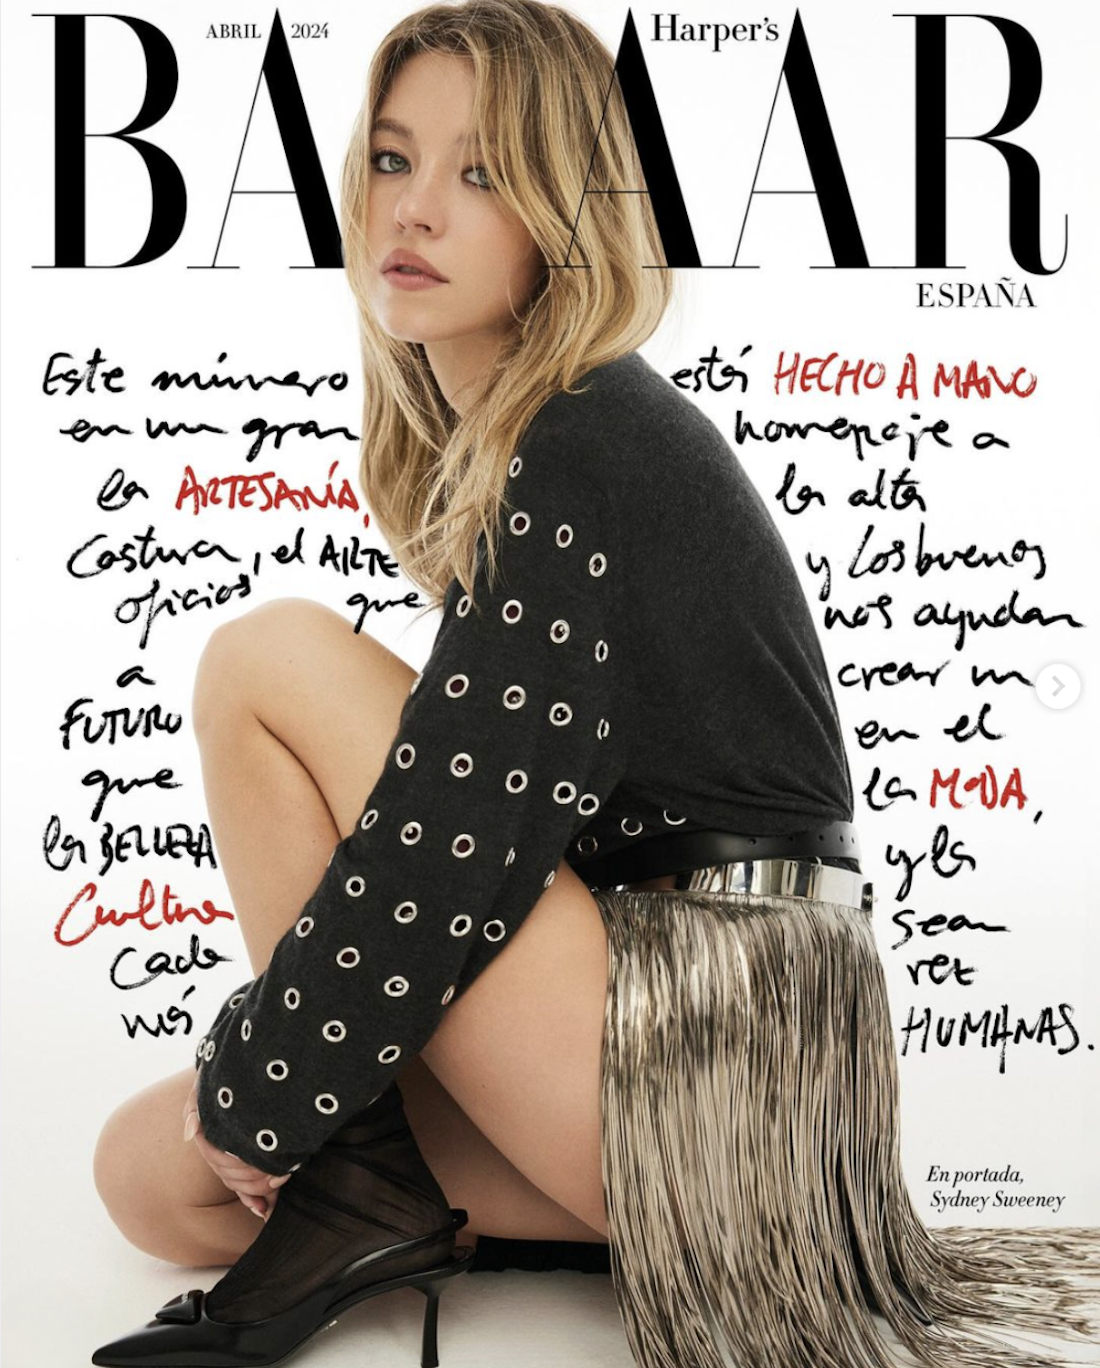 Sydney-Sweeney-by-David-Roemer-Harpers-Bazaar-Spain-April-2024-Cover-1.png